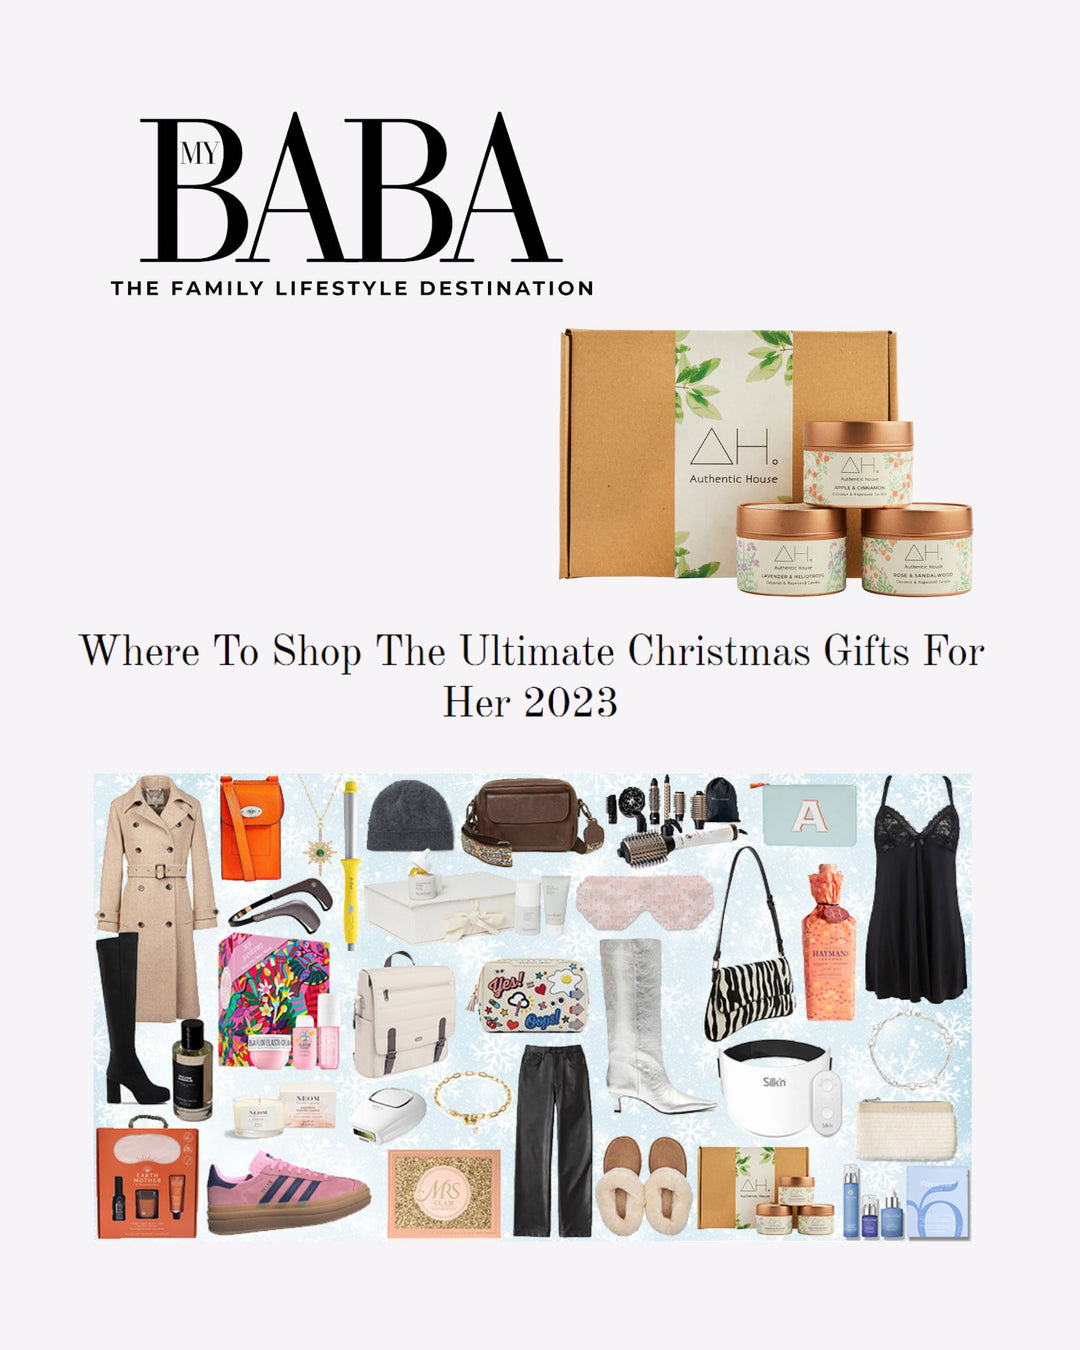 MyBaba Christmas Gift Guide Feature